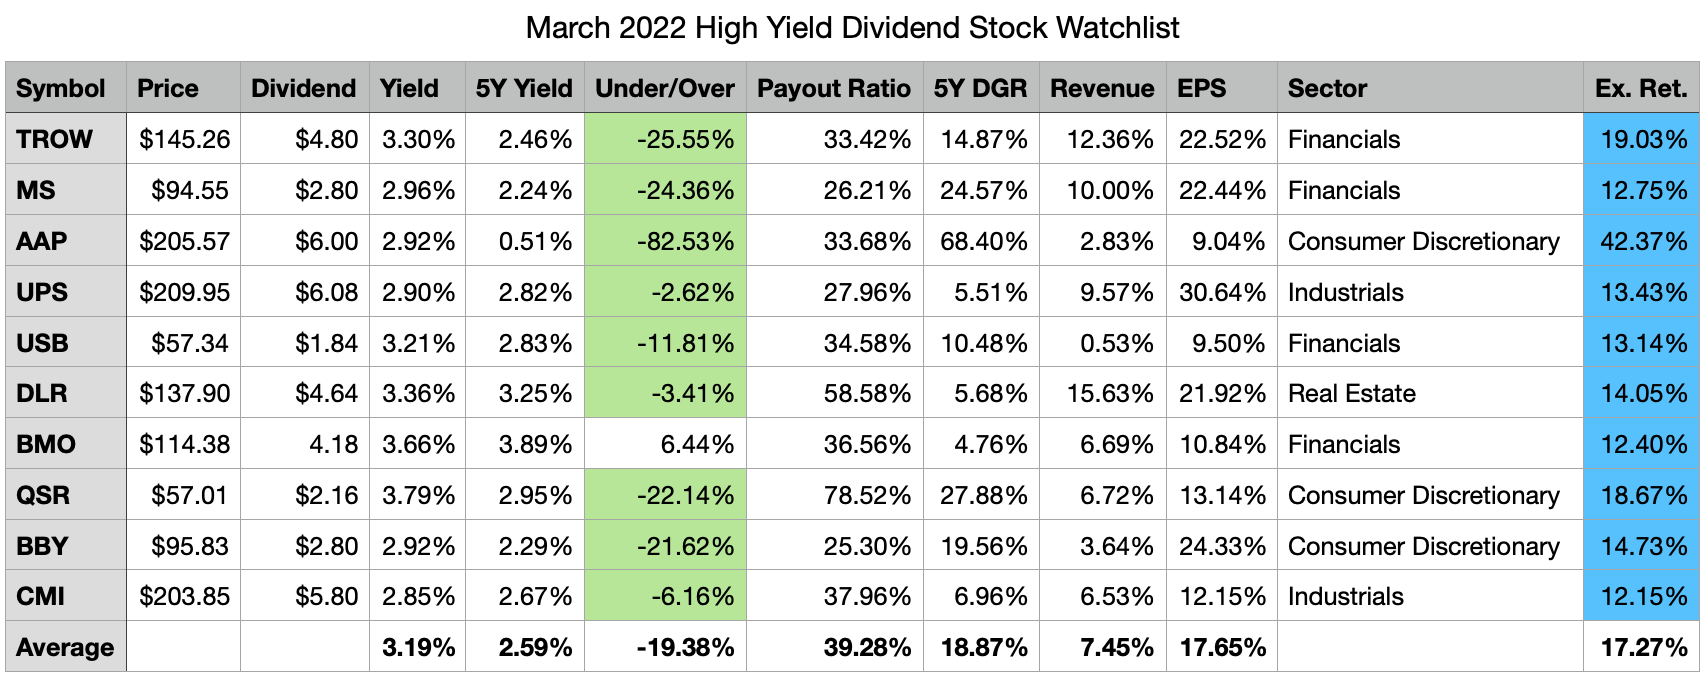 My Top 10 High Yield Dividend Stocks For March 2022 Seeking Alpha